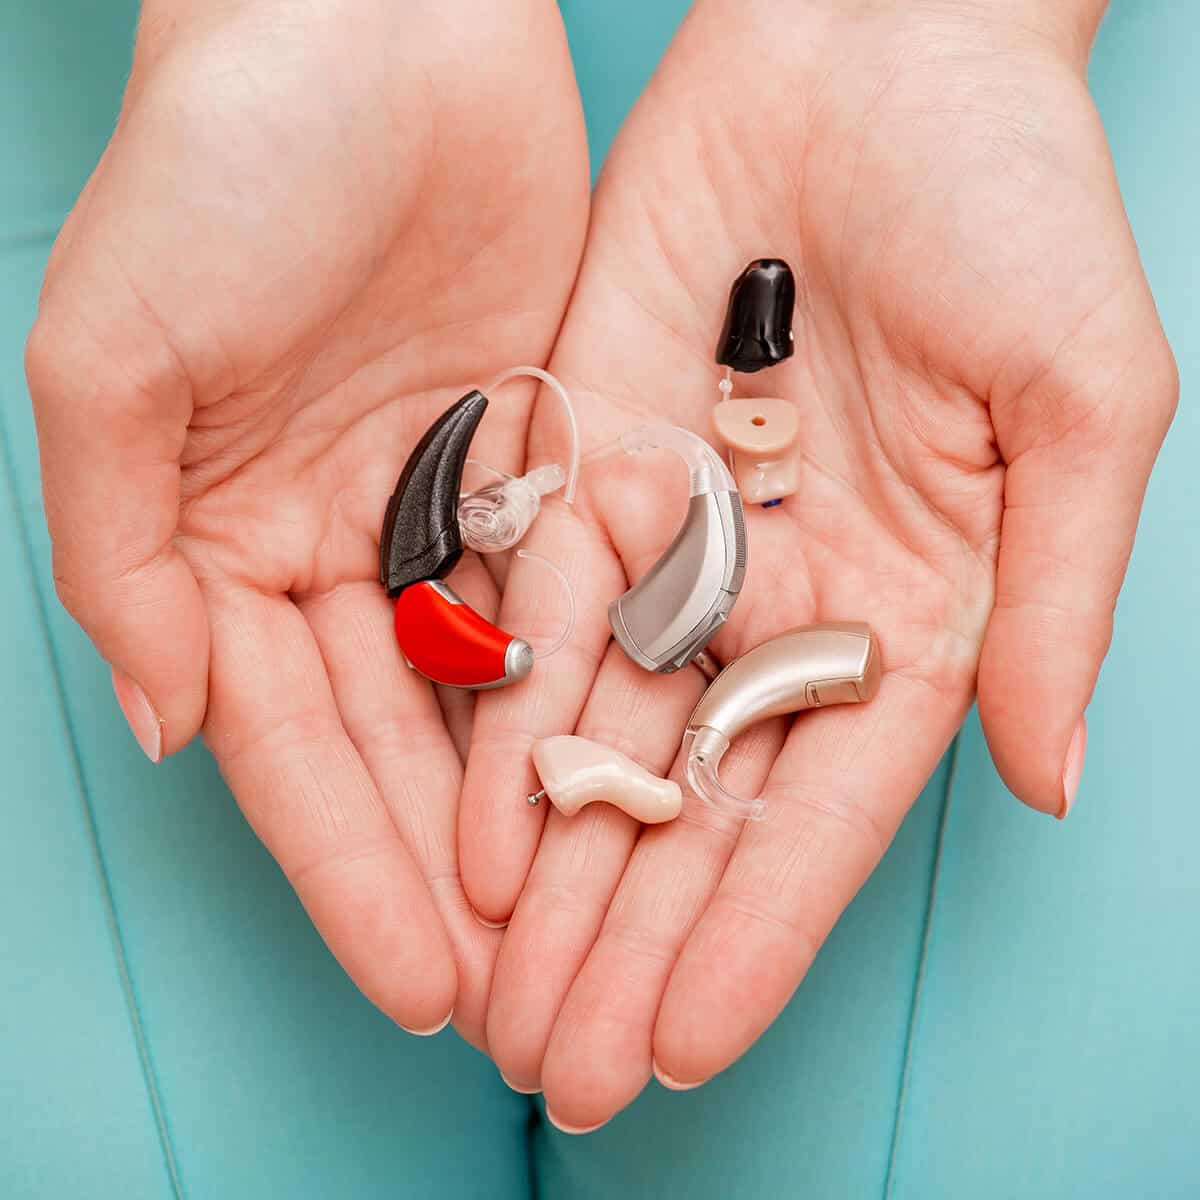 hearing aids in audiologist hands